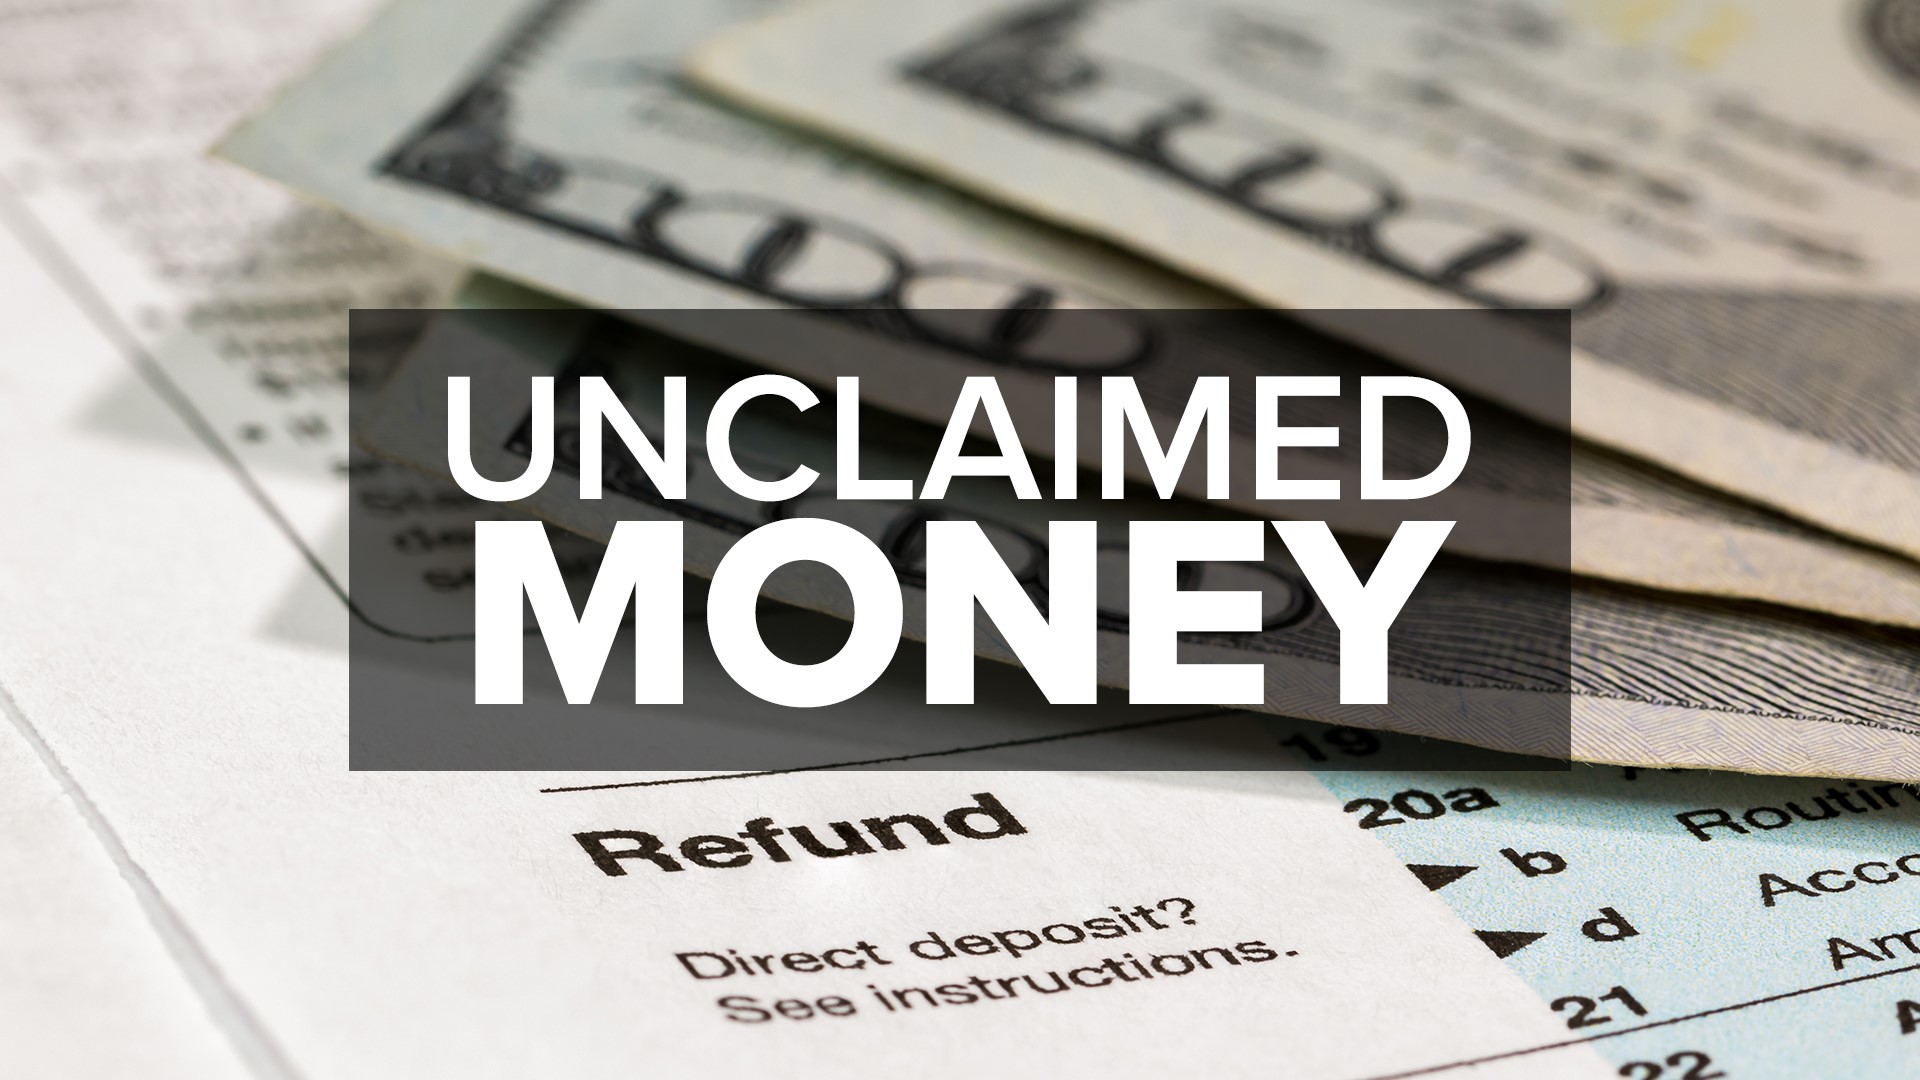 Unclaimed money from City of San Diego